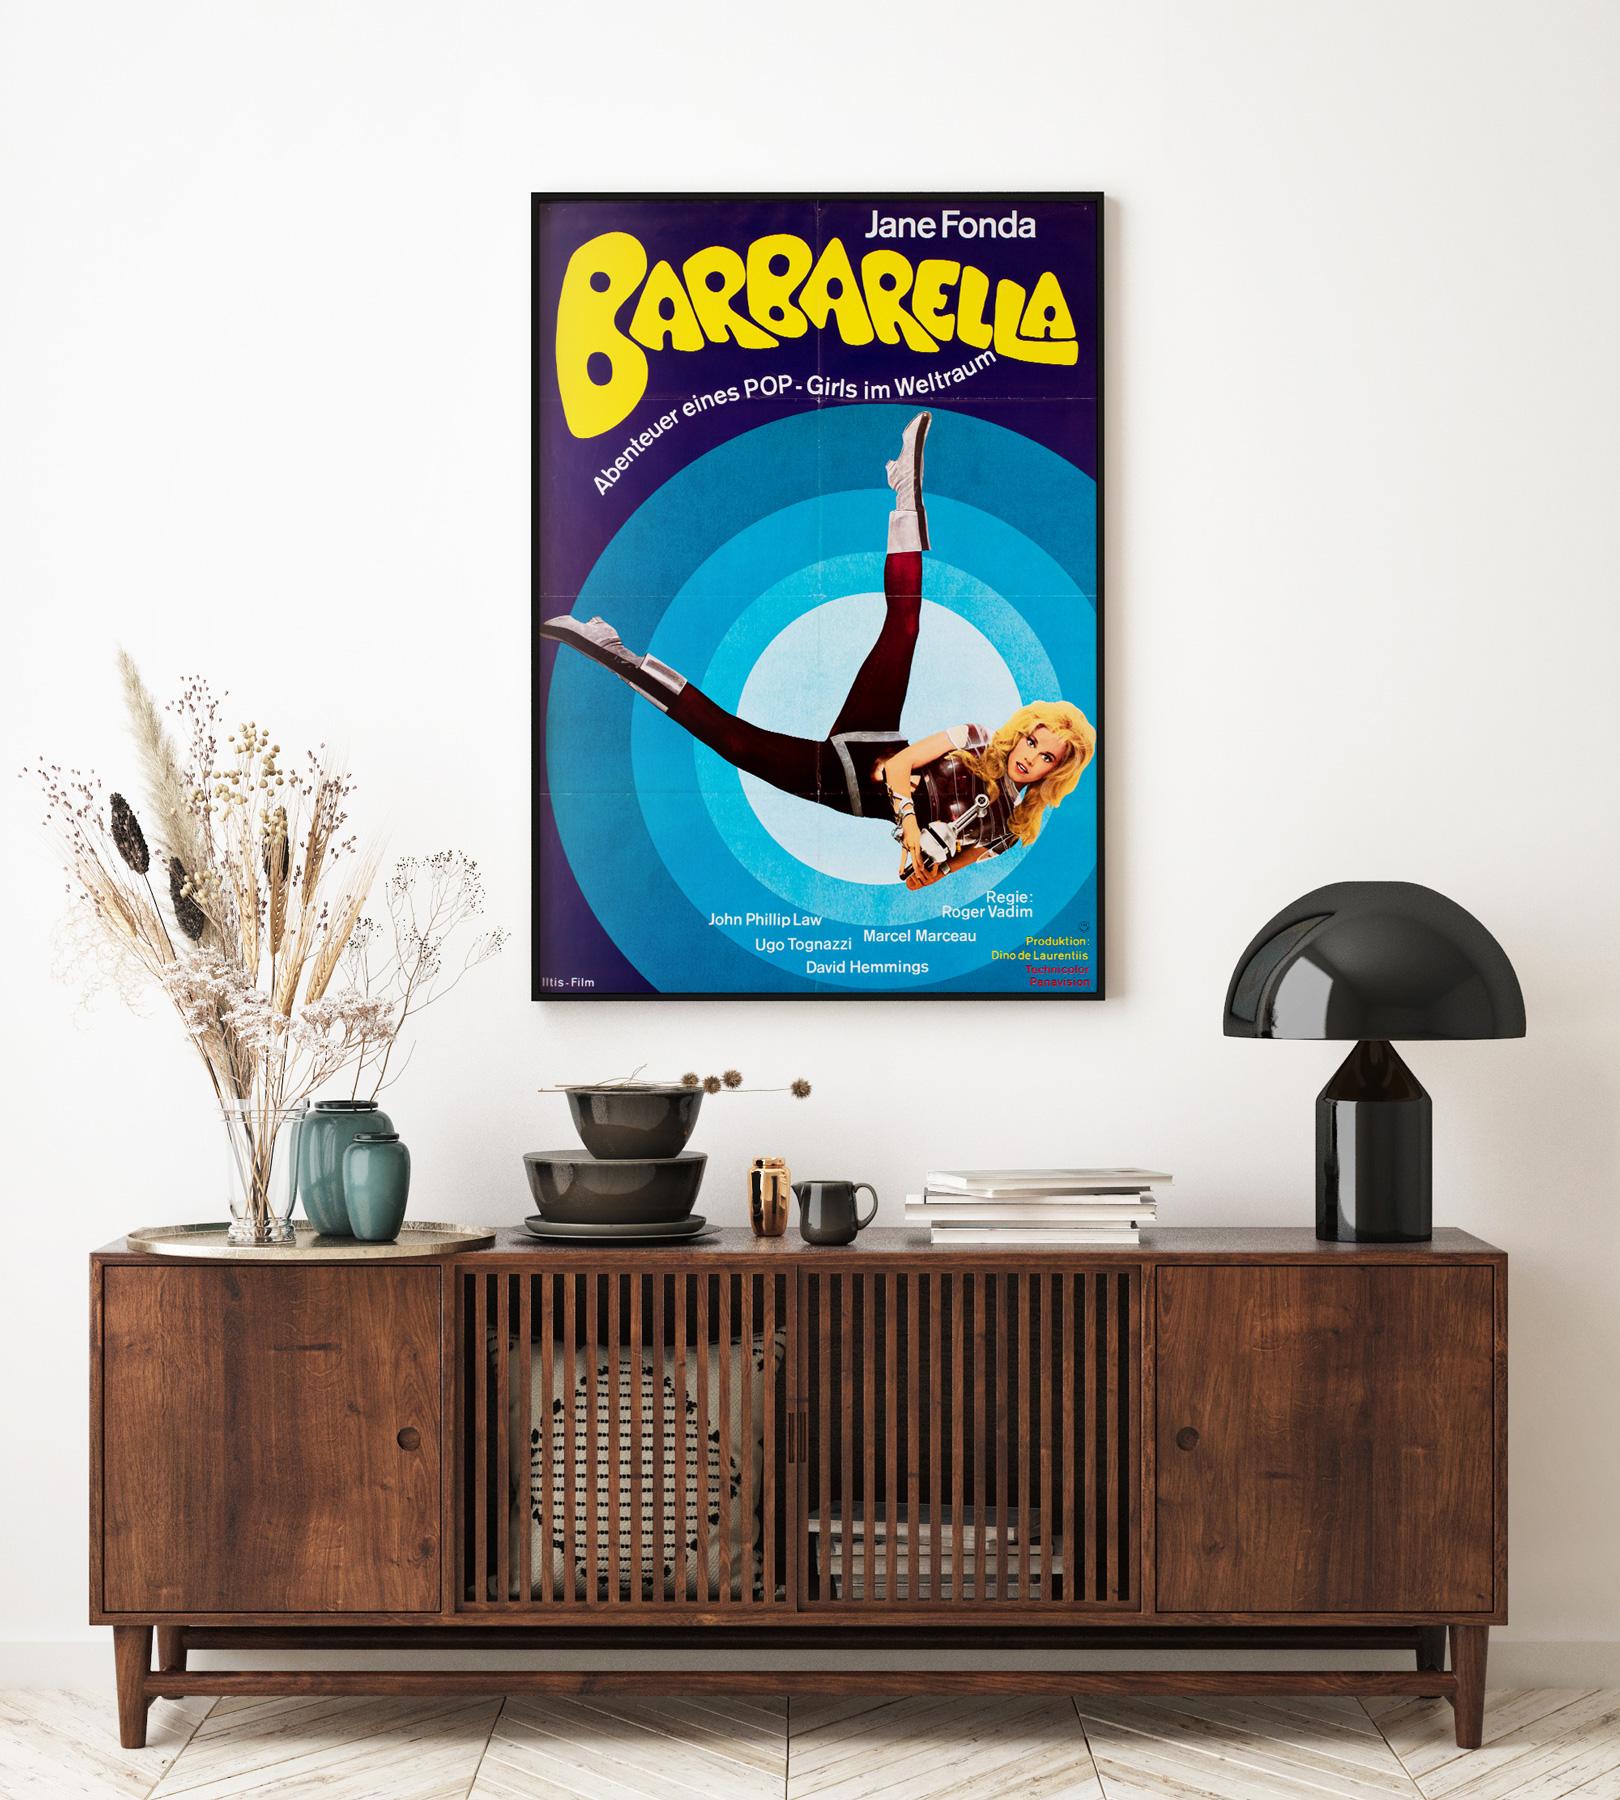 We love the colours and pop-art styling on this German 70s re-release film poster for 60s classic Barabrella. Barbarella is a film that inspired some wonderfully poster imagery and this one is no exception.

This original vintage movie poster is